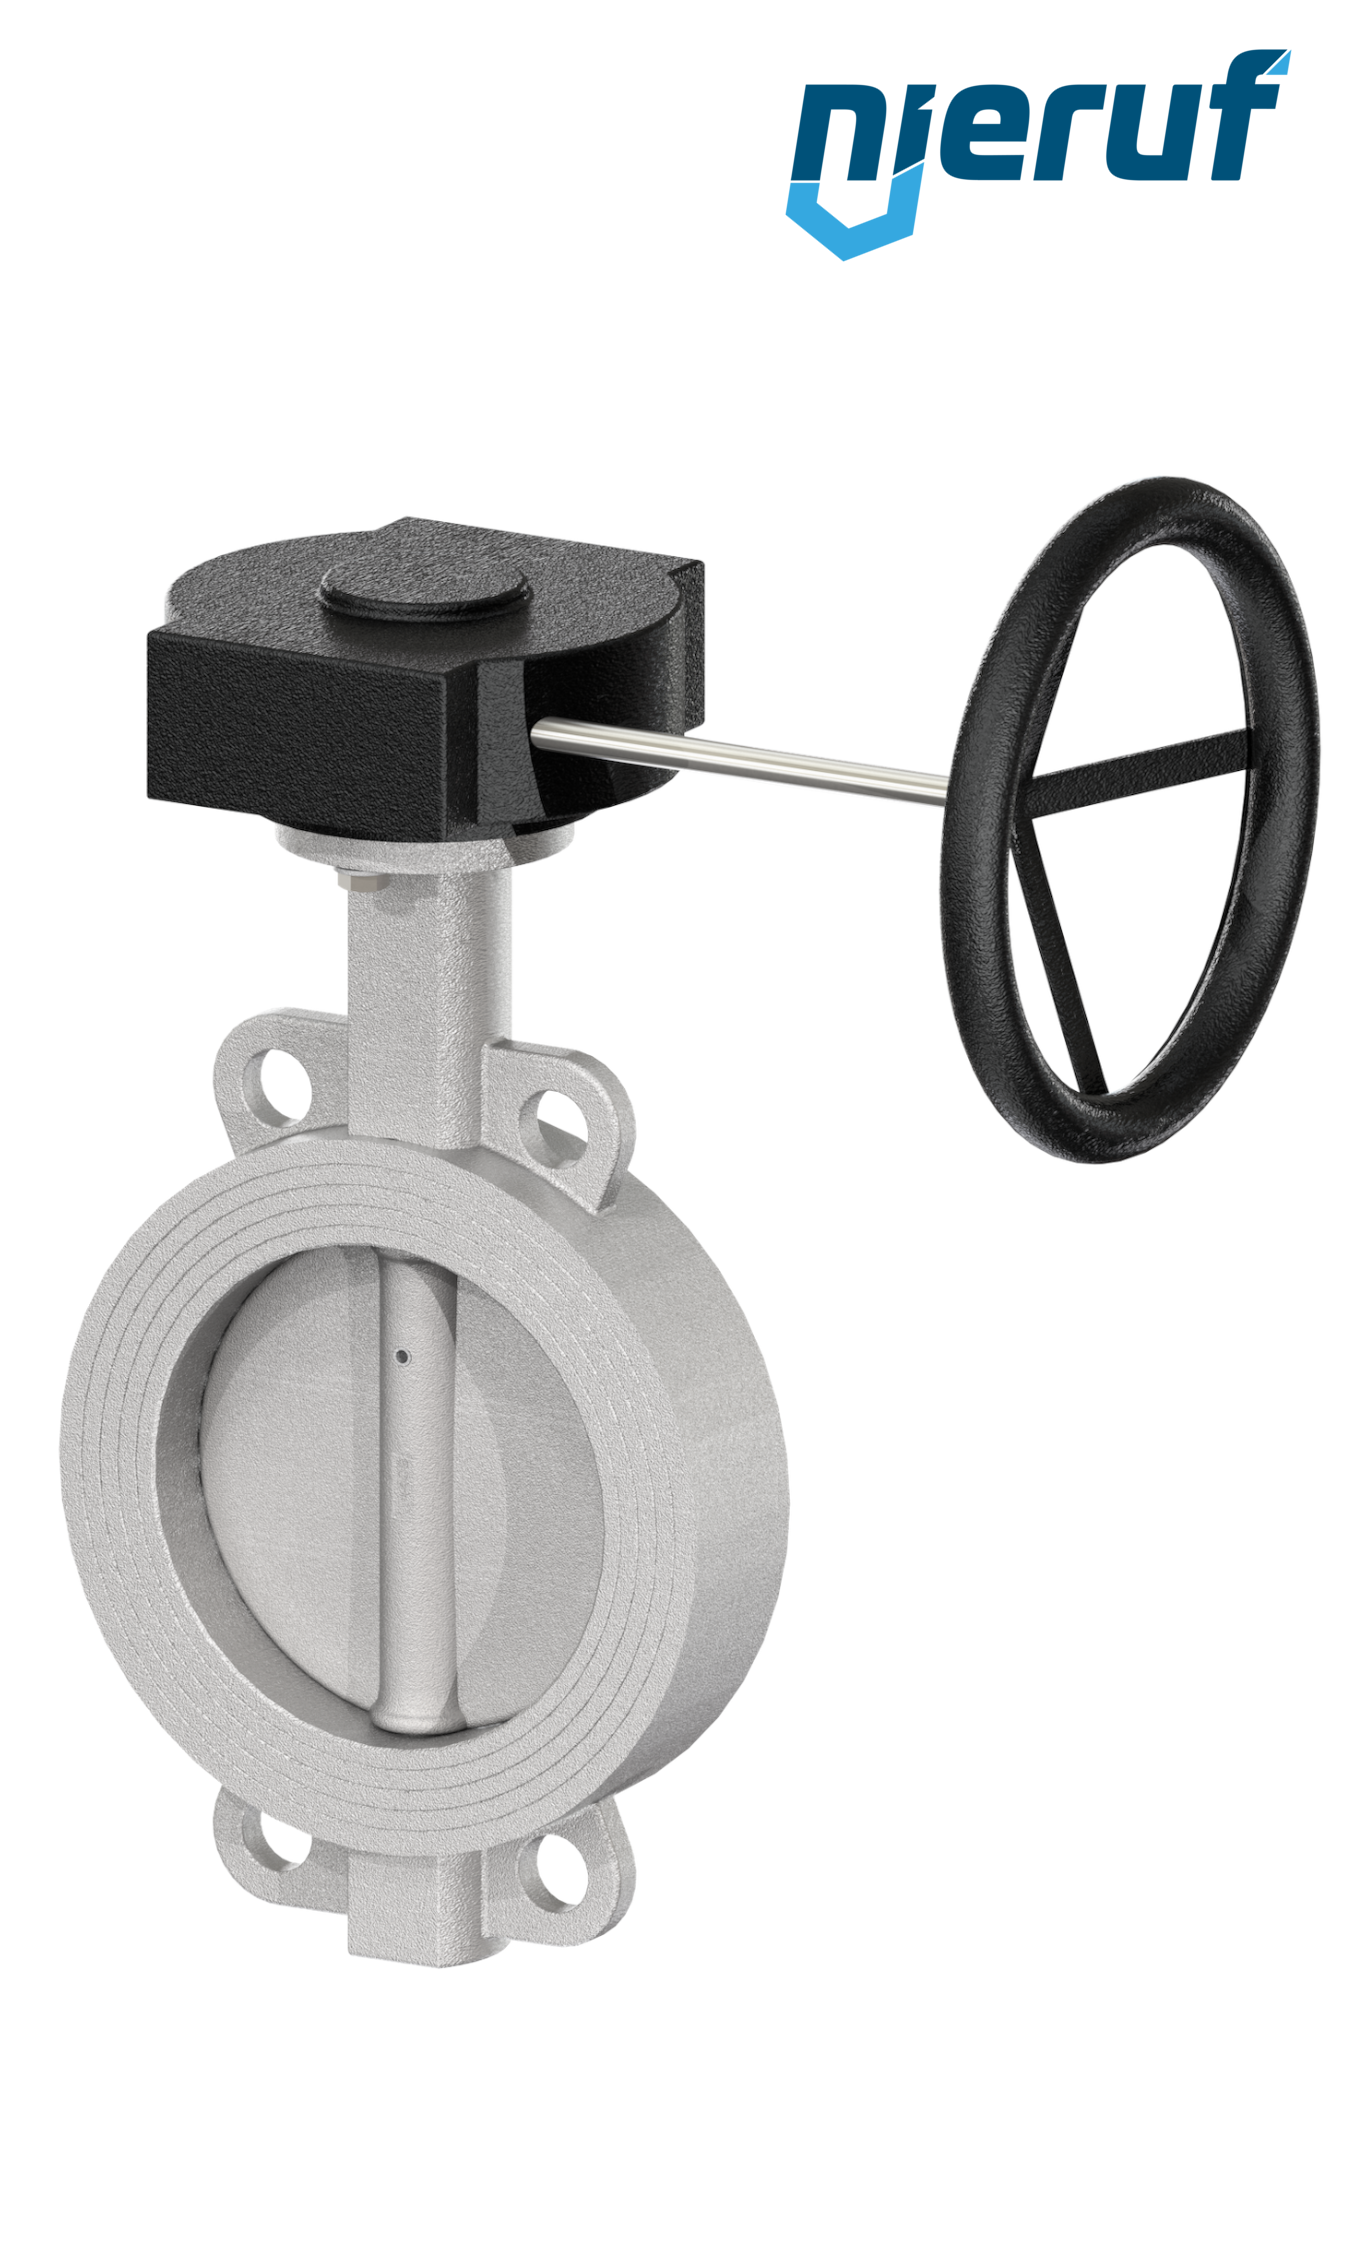 Butterfly-valve-stainless-steel DN 50 PN16 AK08 metall gearbox